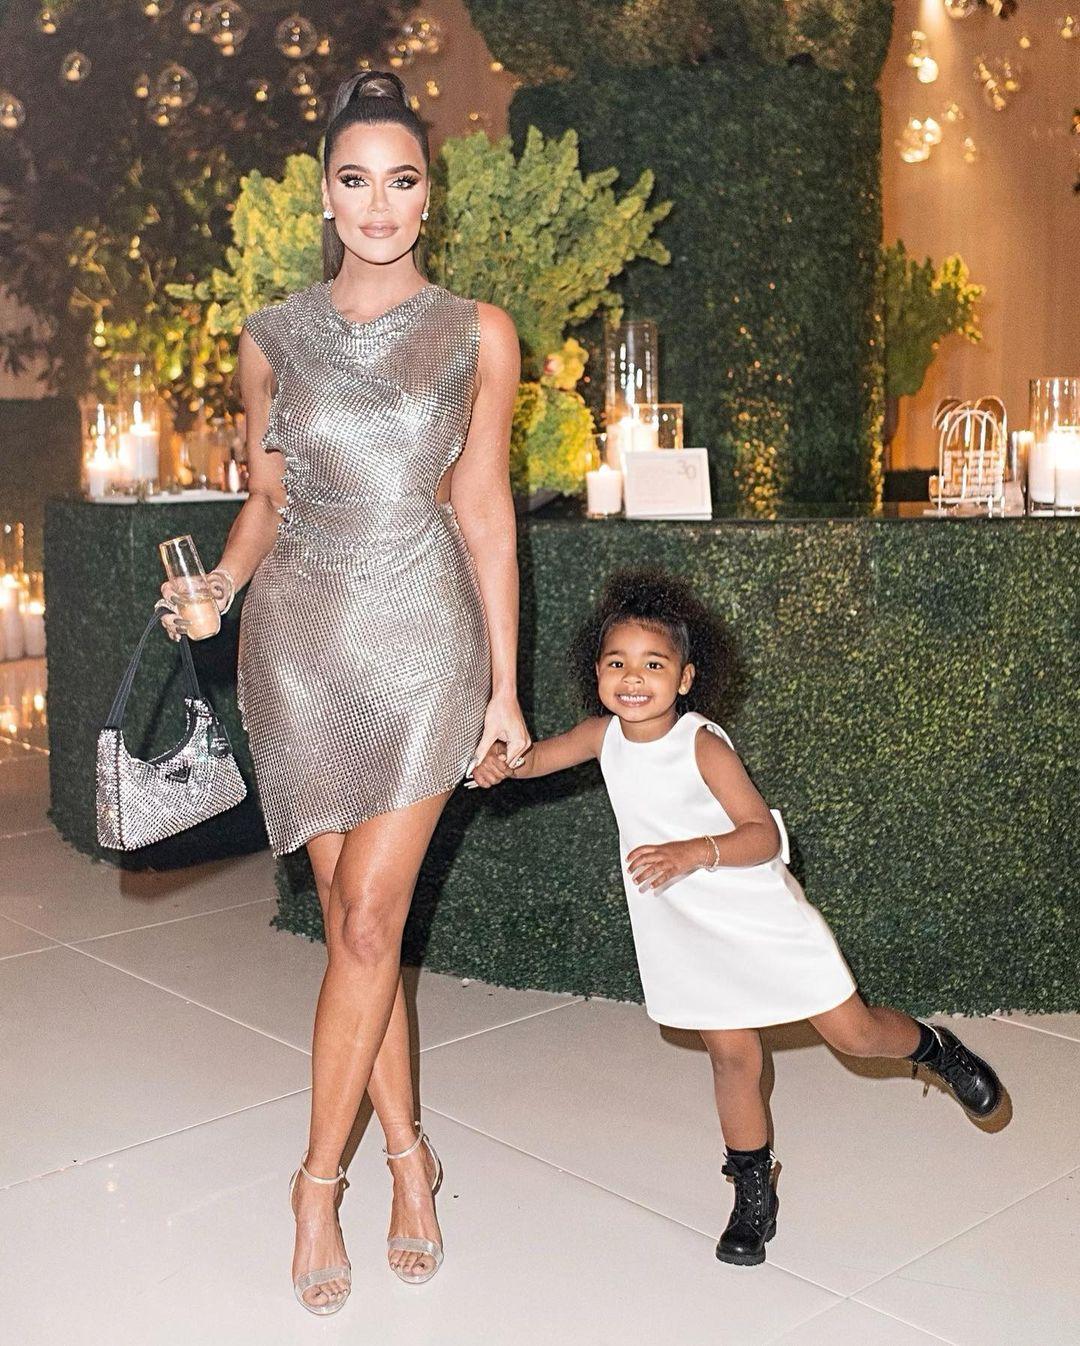 Khloe Kardashian's 3-Year-Old Daughter Wears $495 Dolce & Gabbana Dress After Star Slammed For 'Not Giving To People In Need'